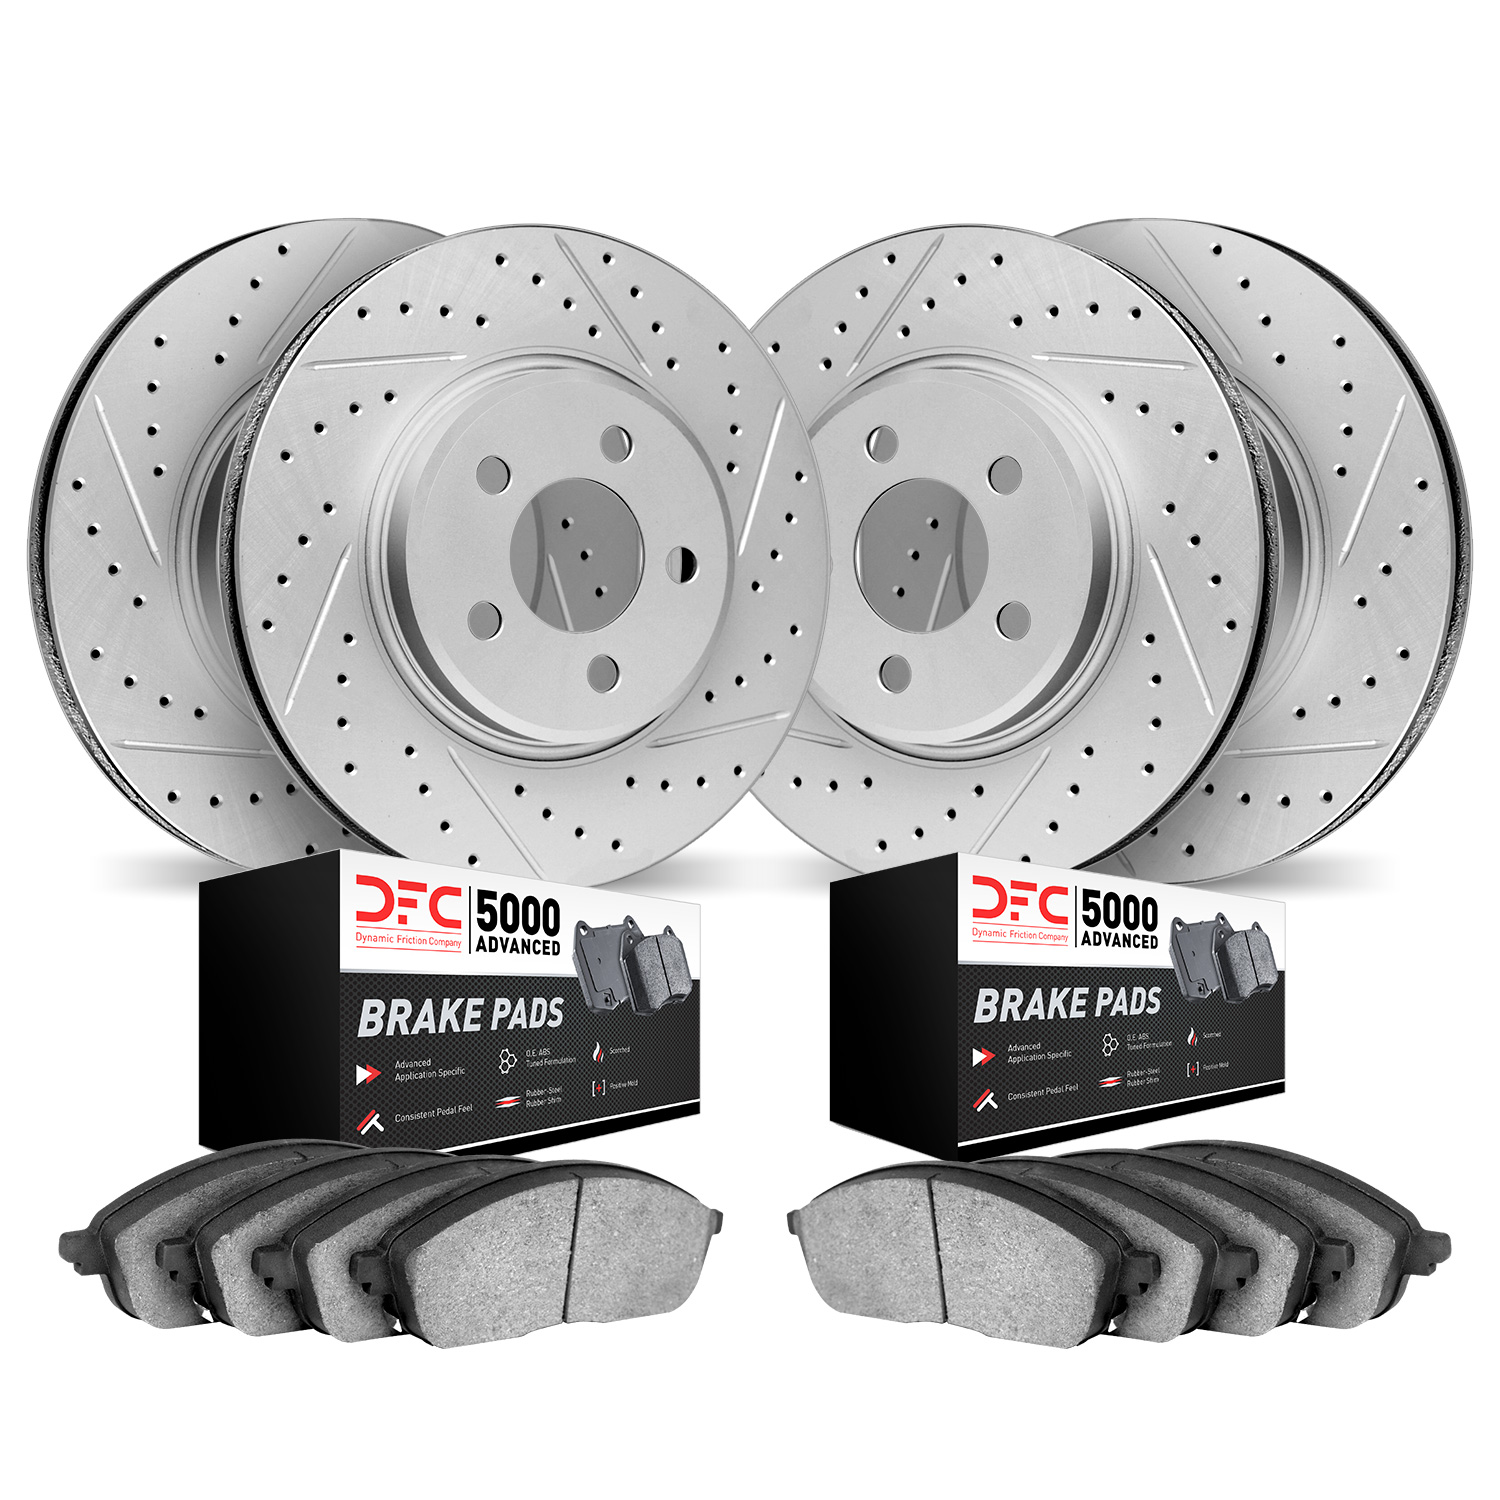 2504-46010 Geoperformance Drilled/Slotted Rotors w/5000 Advanced Brake Pads Kit, 2005-2010 GM, Position: Front and Rear